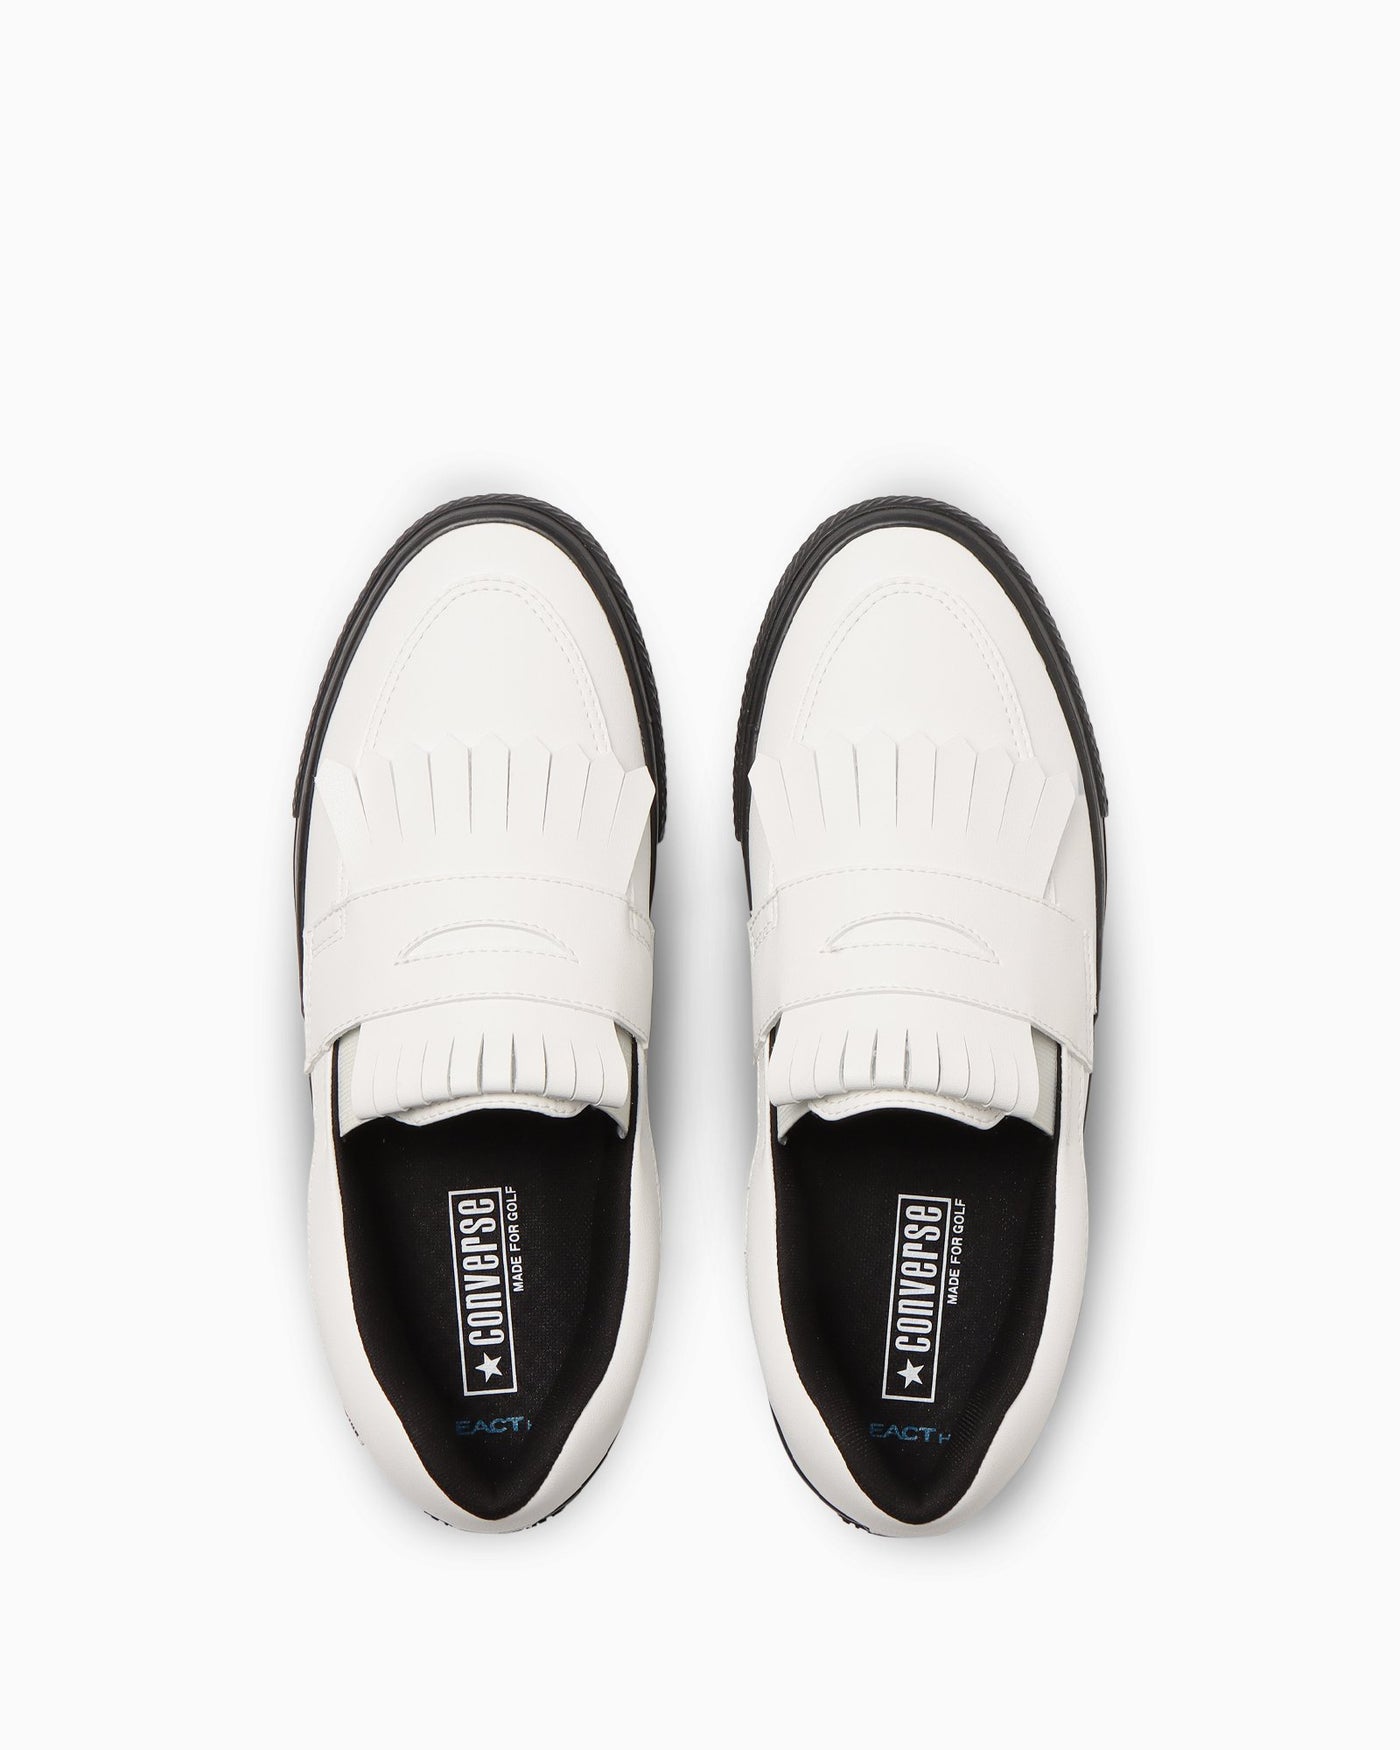 Converse All Star GF Loafer